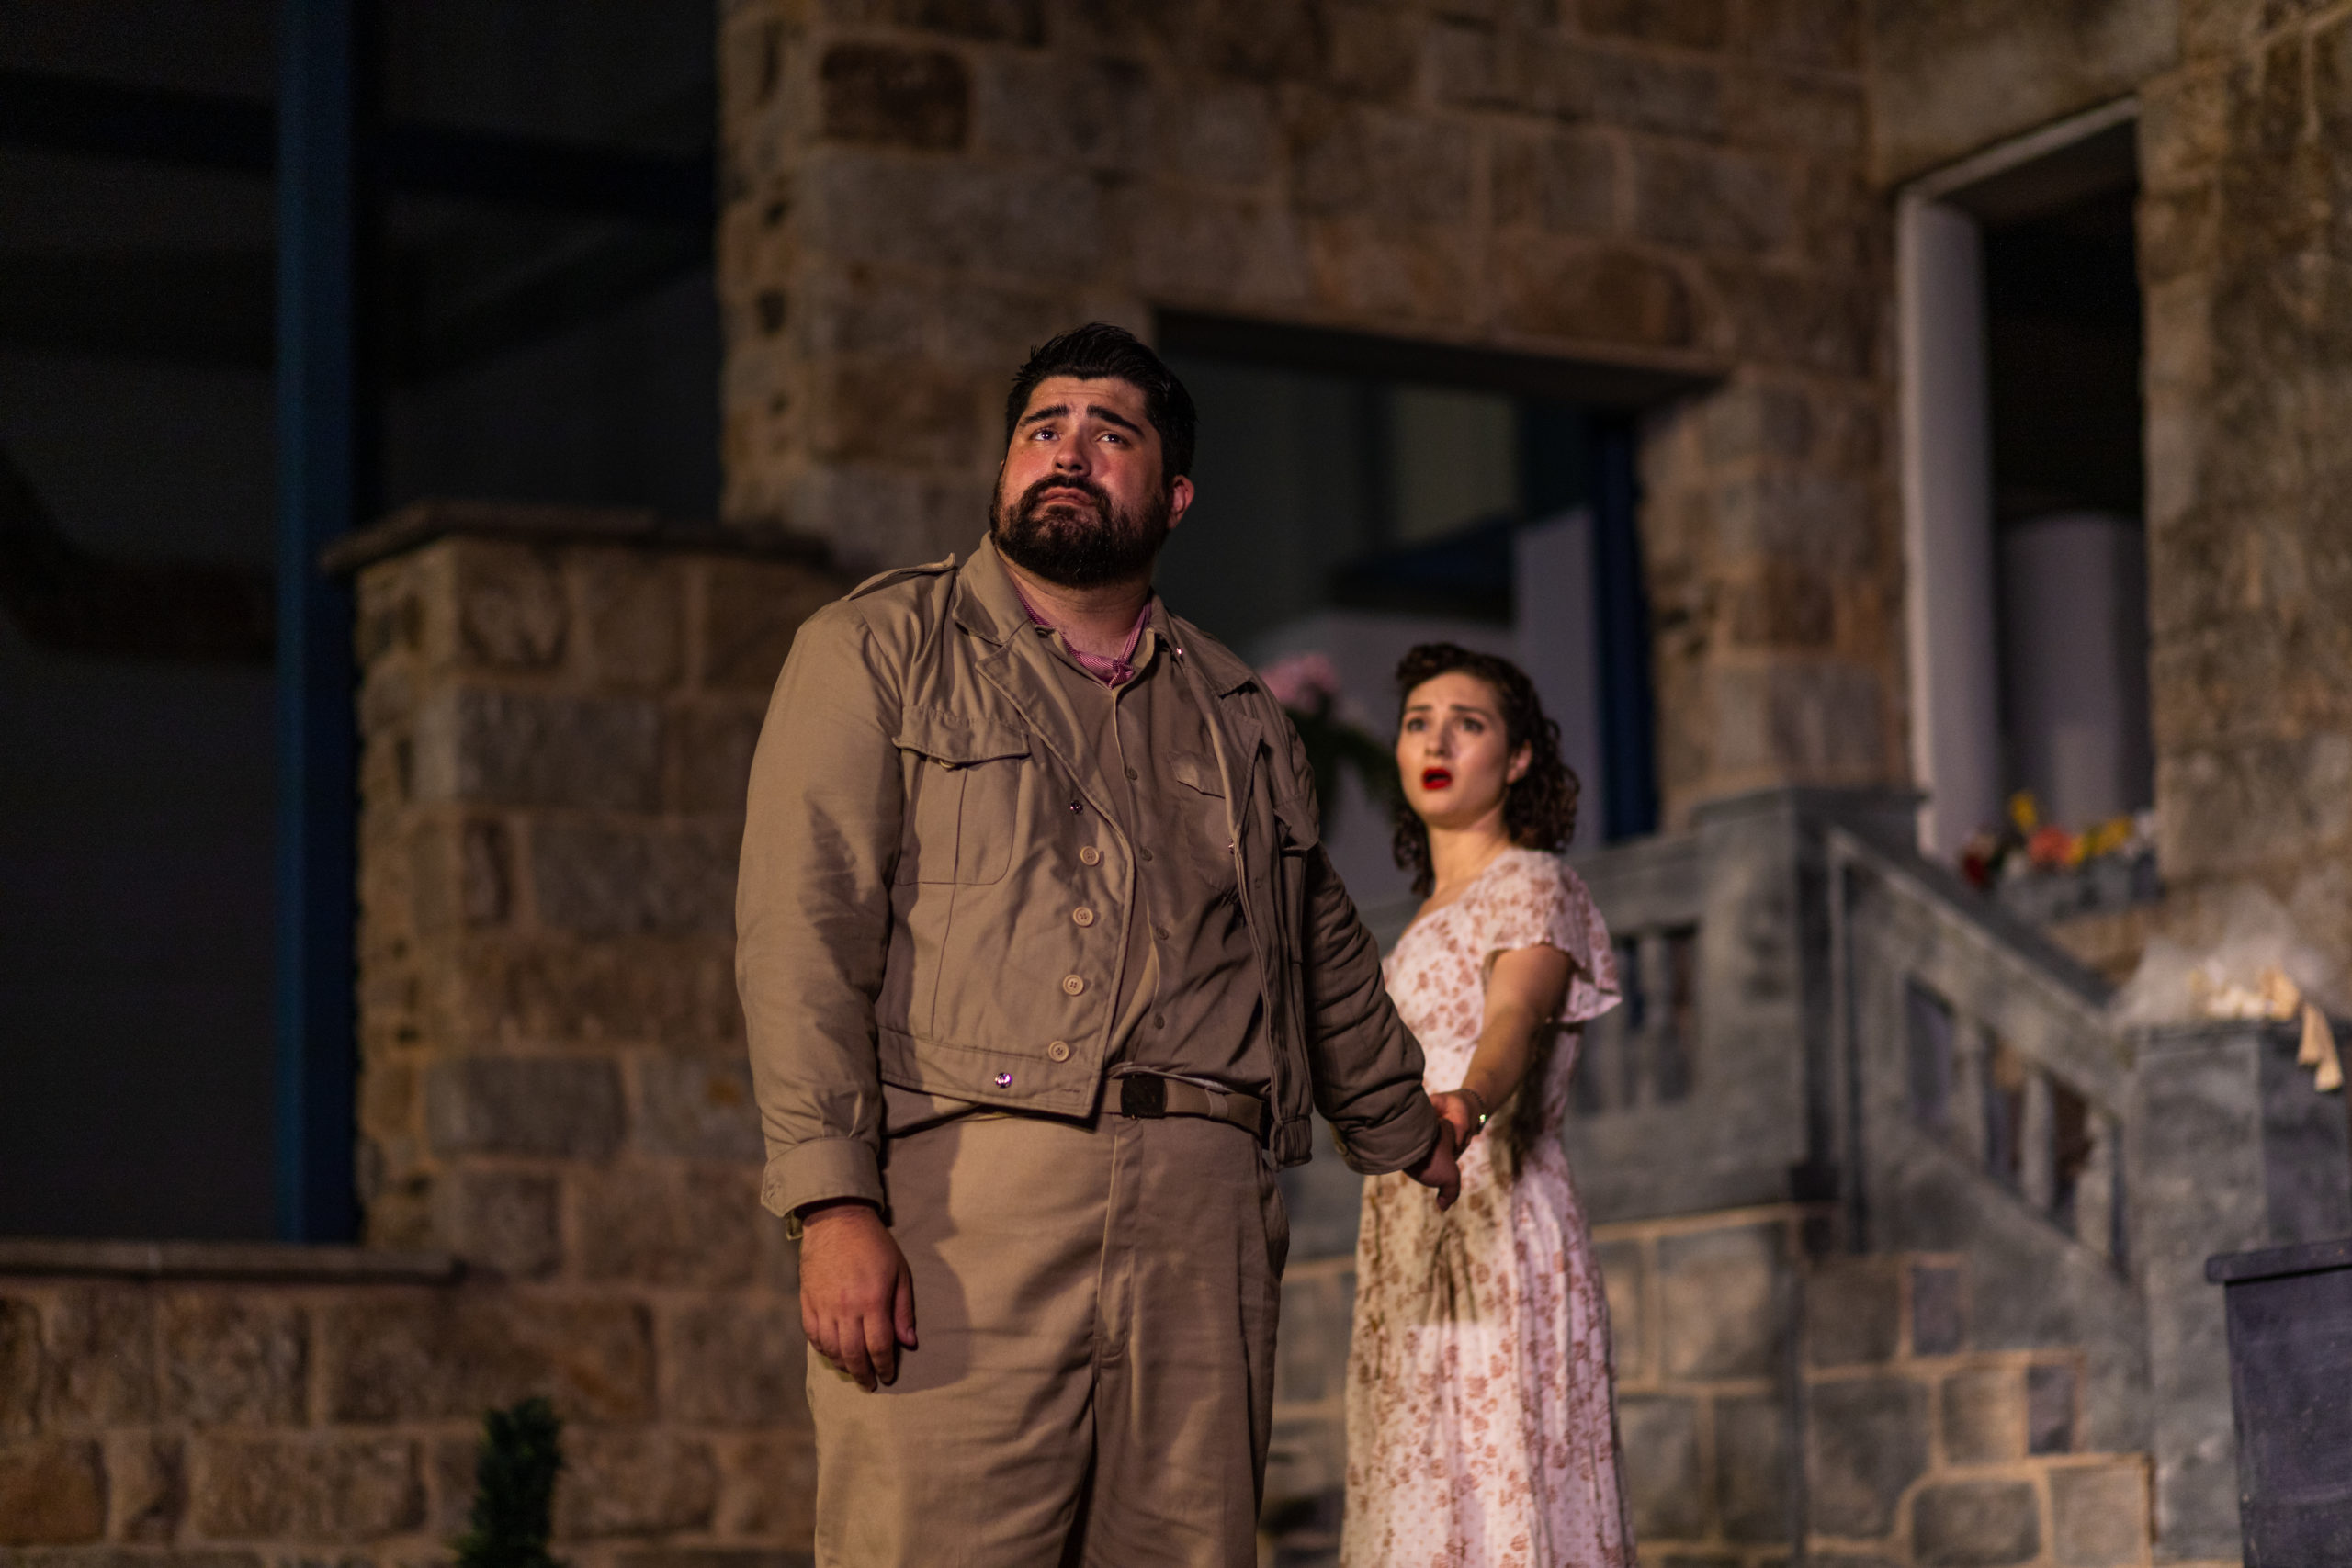 Dylan Arredondo and Anna DiGiovanni as Benedick and Beatrice in Much Ado About Nothing. Photos by Kiirtsn Pagan.